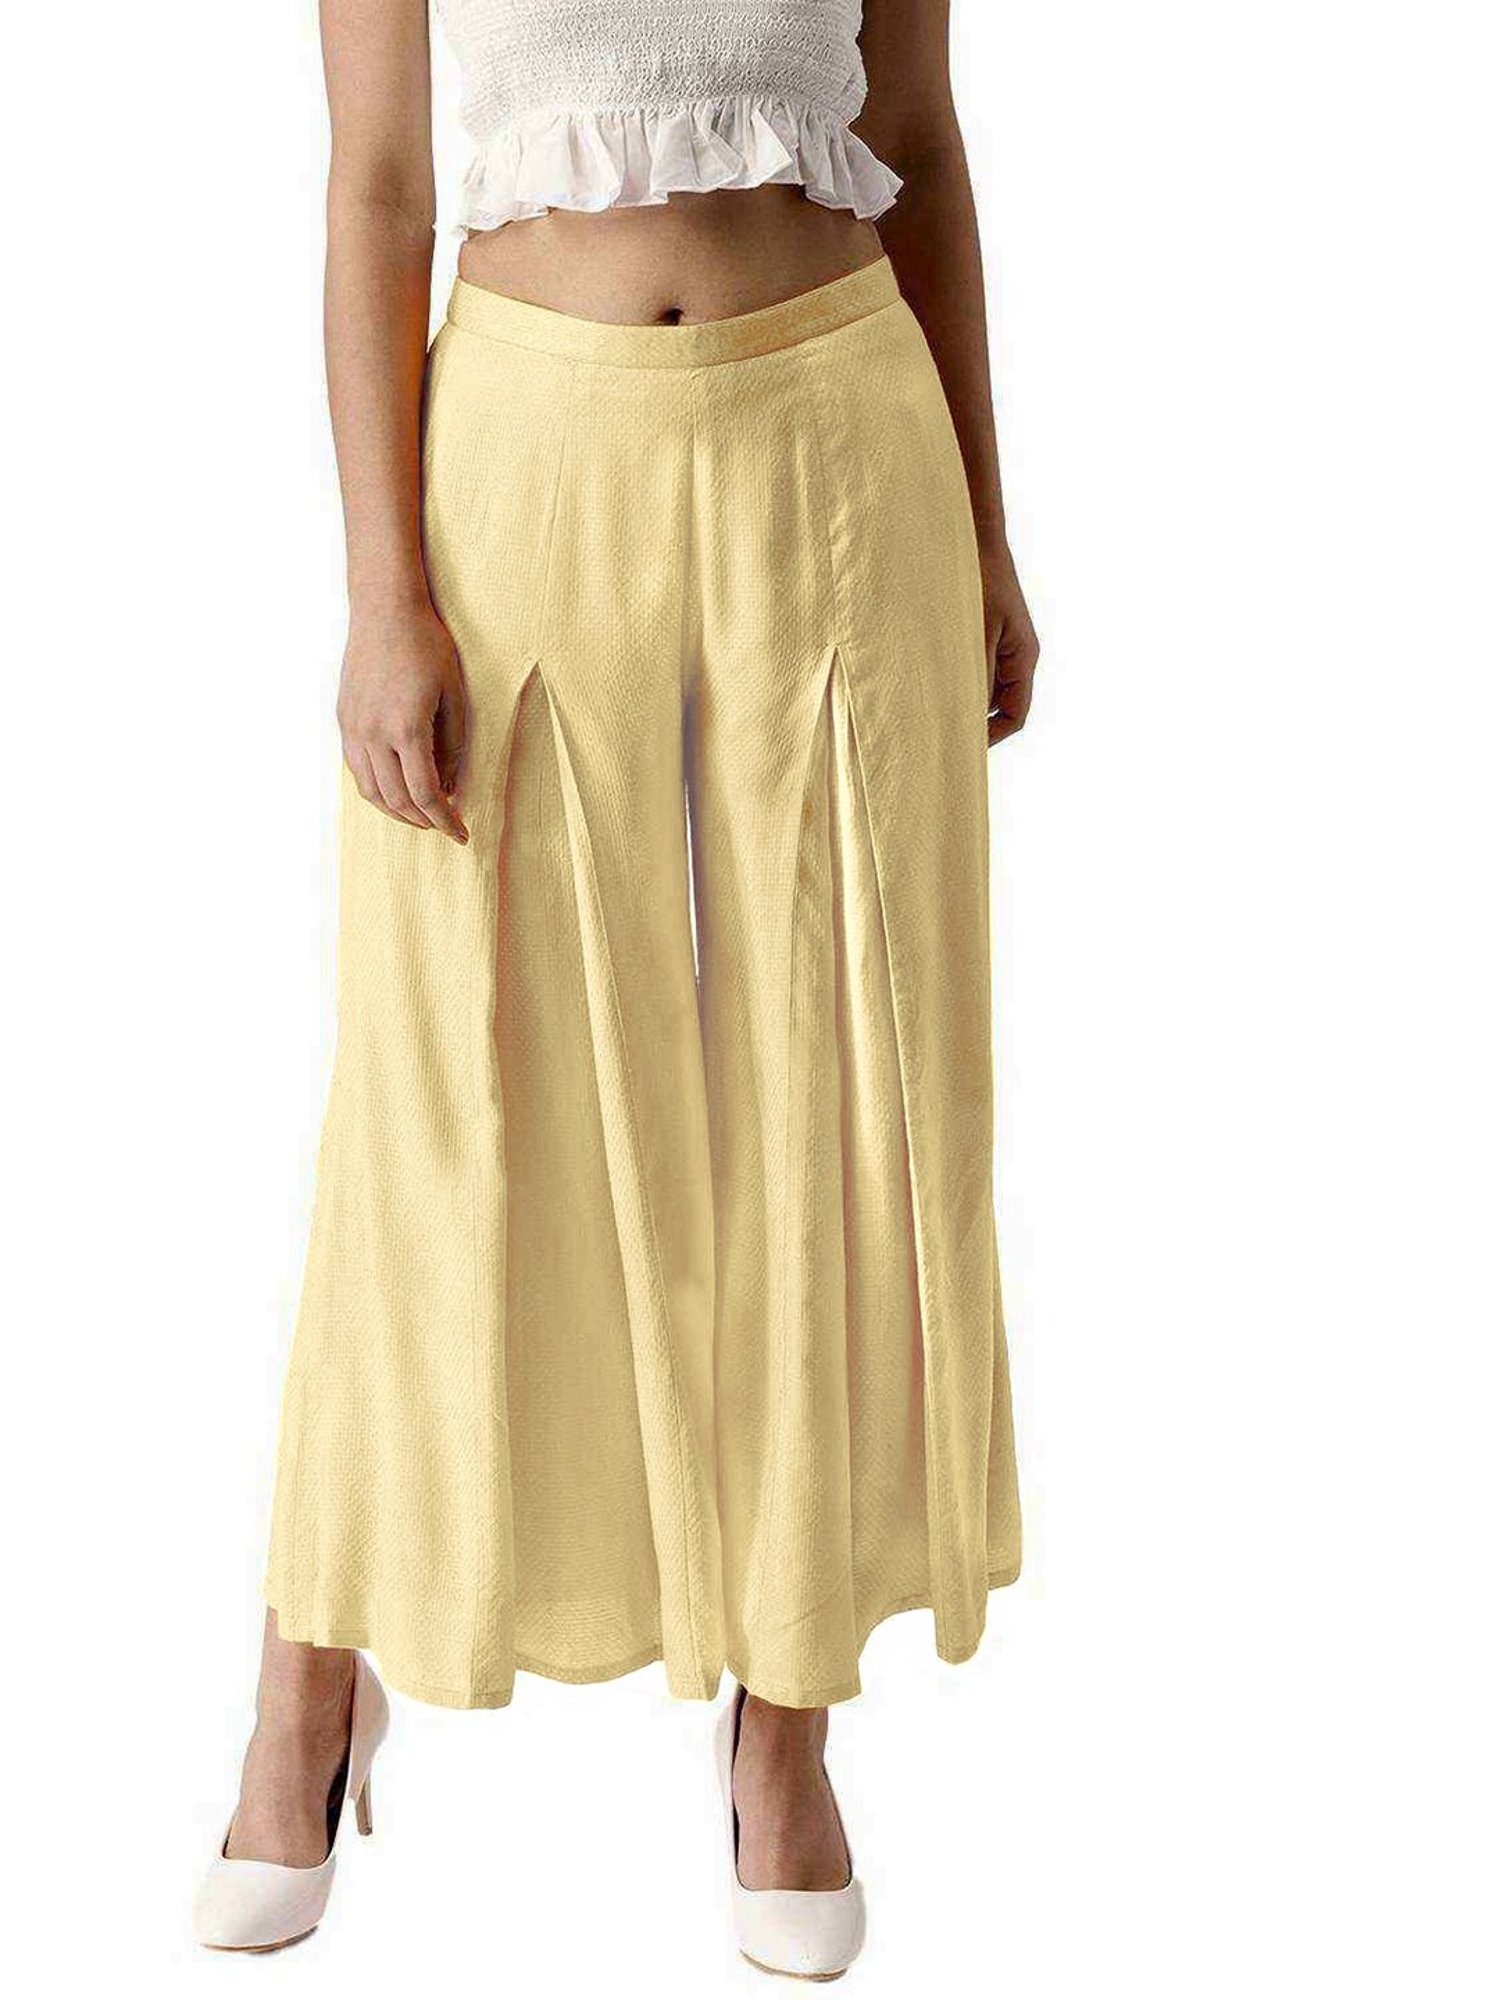 ladyline Plain Rayon Palazzo Pants with Pockets - 24 inch Inseam Golden  Brown at Amazon Women's Clothing store